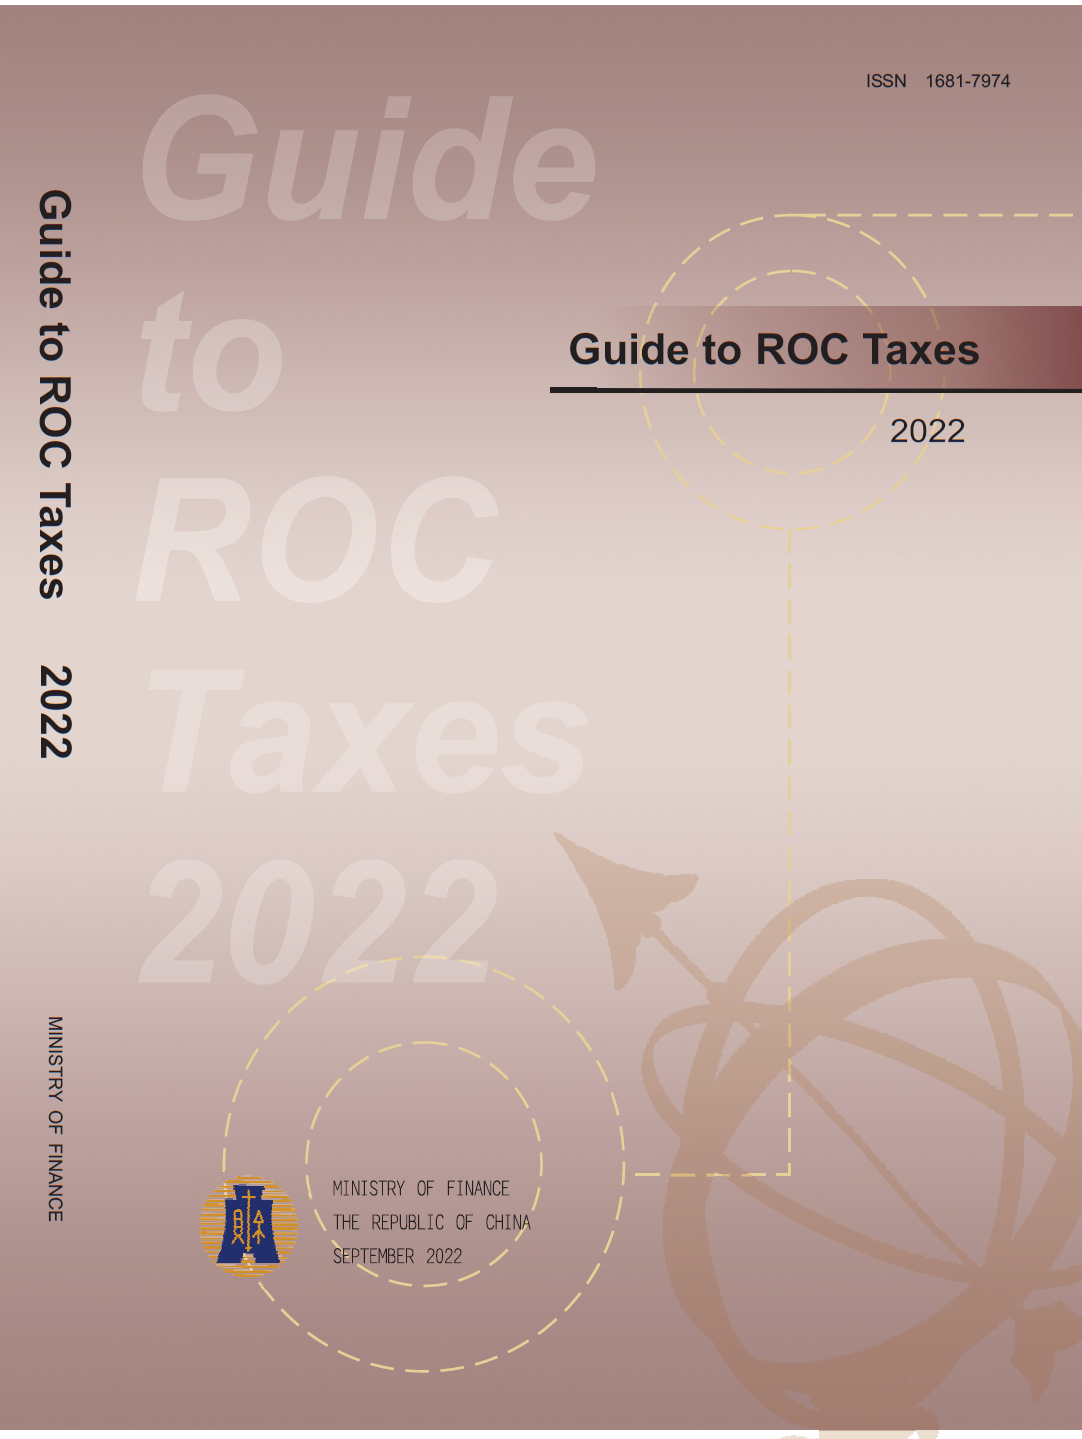 Guide to ROC Taxes 2022